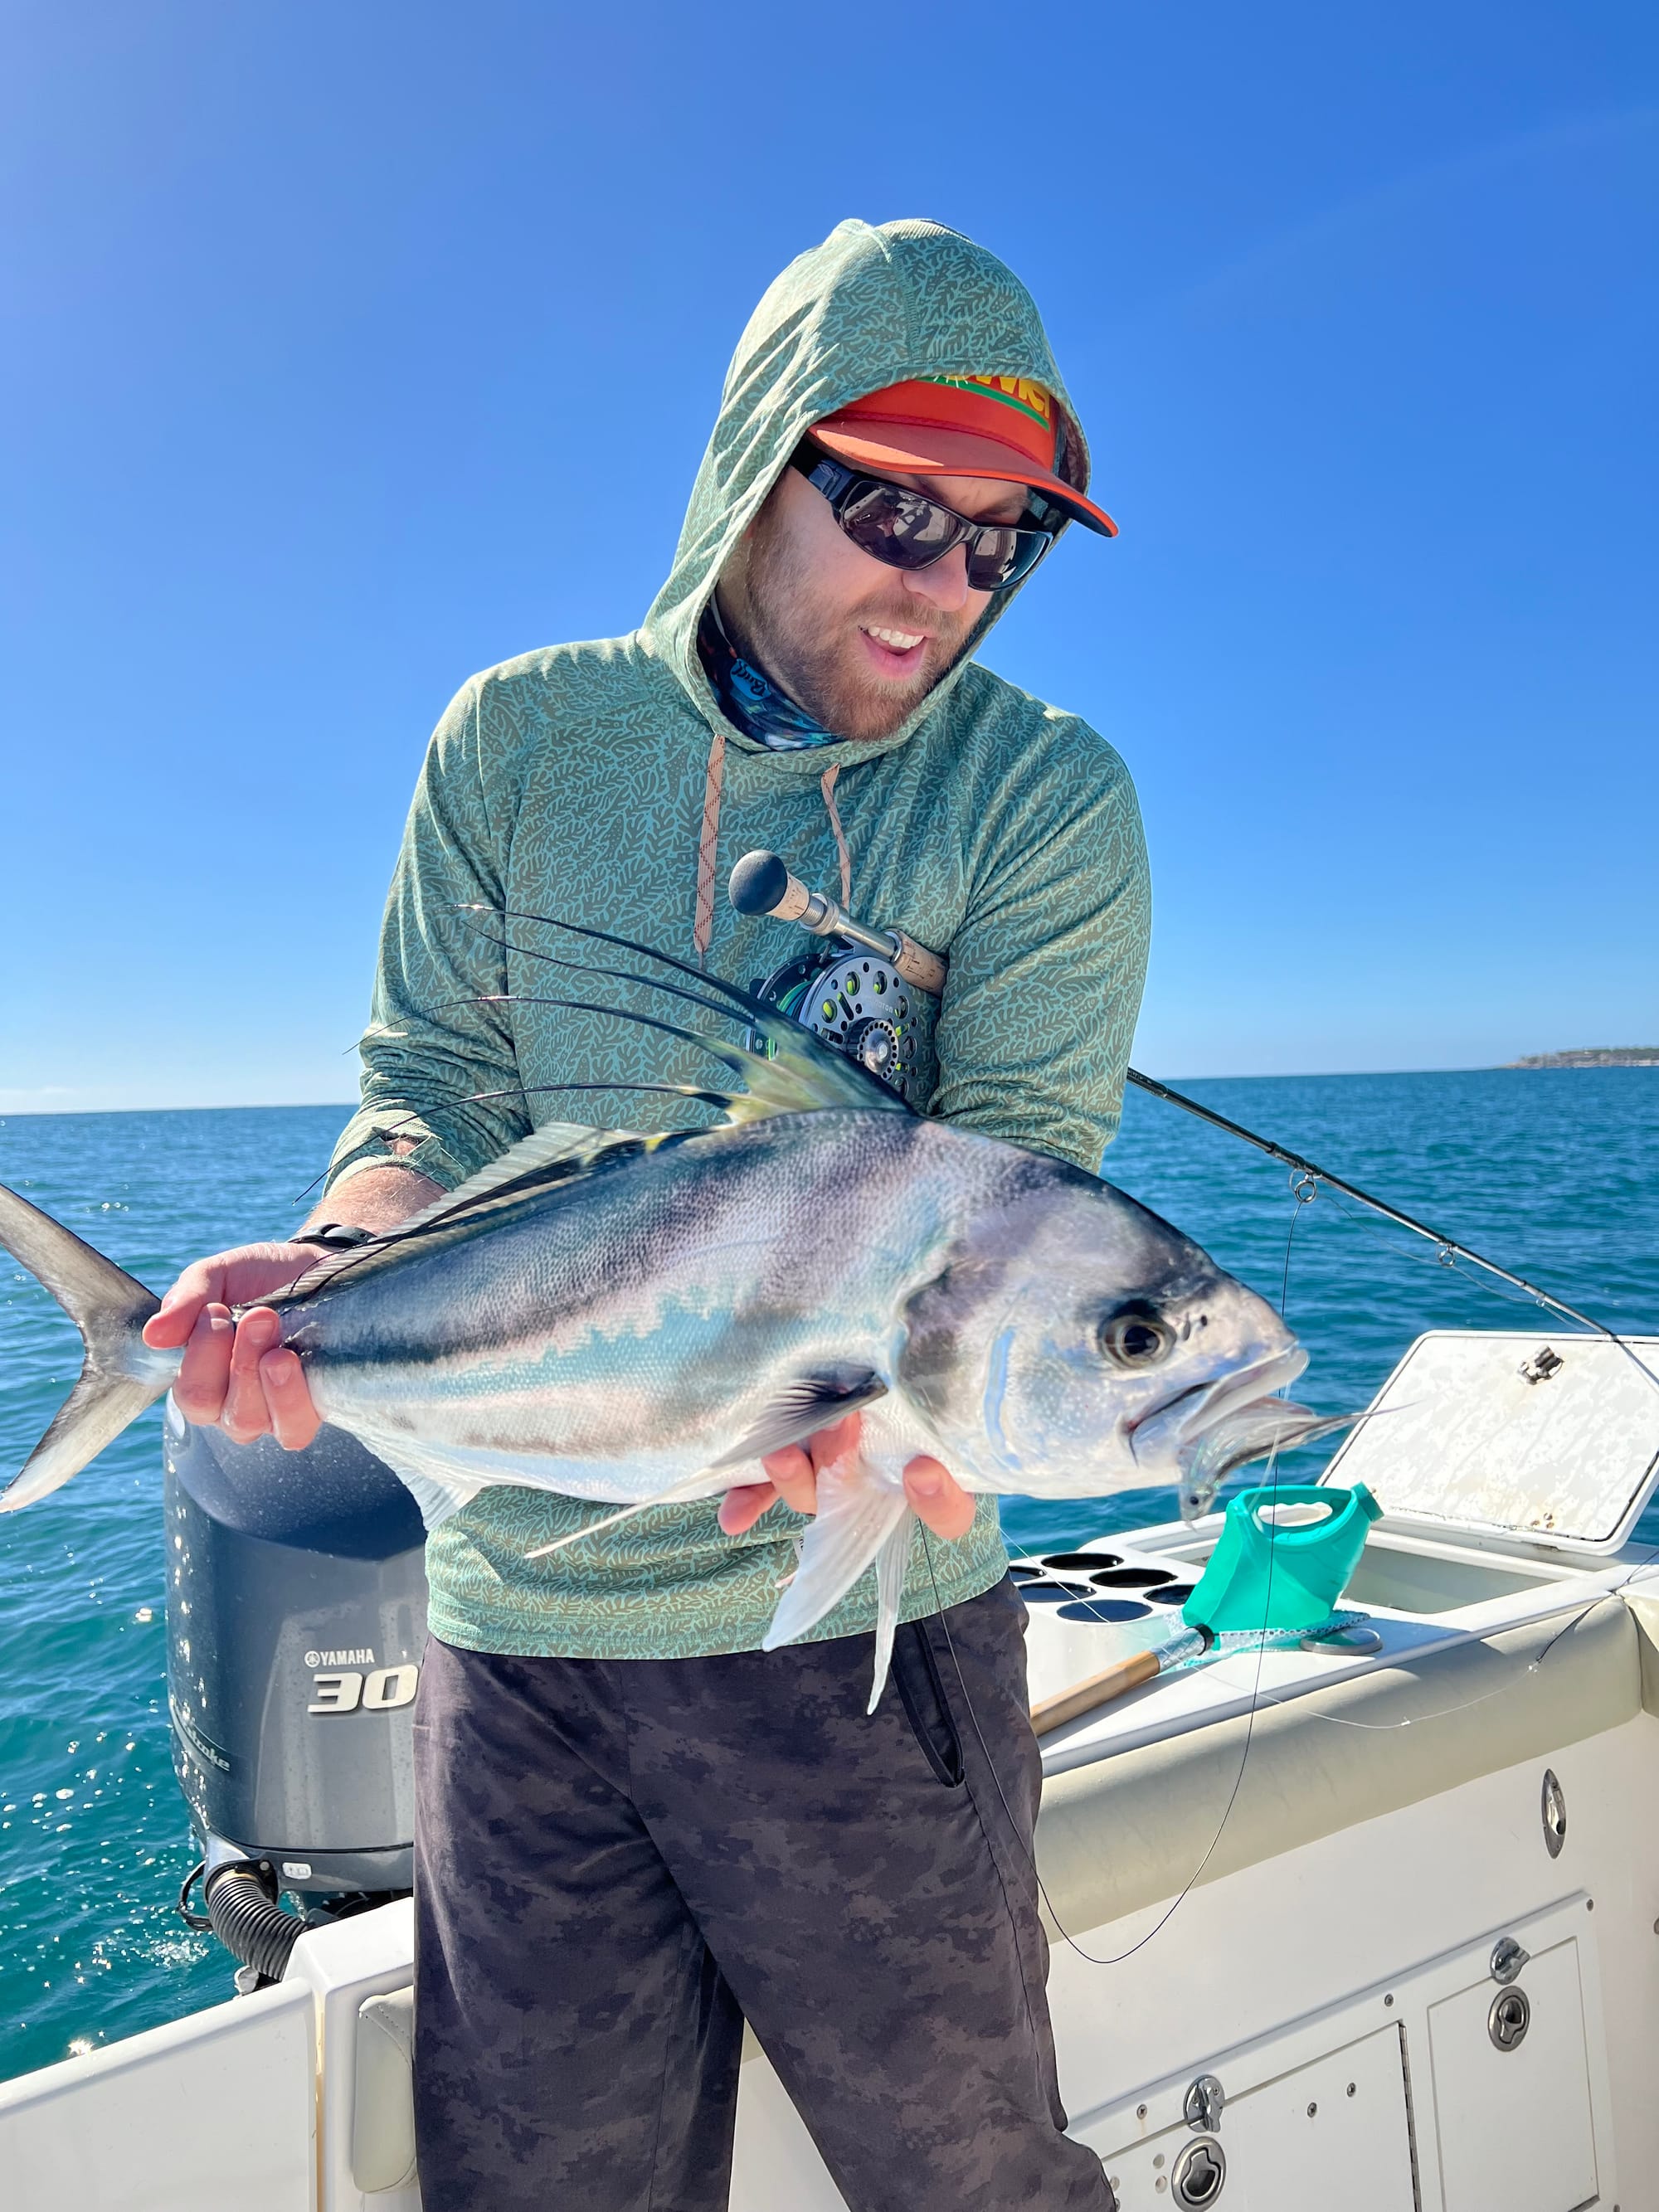 Fly fishing for rooster fish in Baja, Mexico